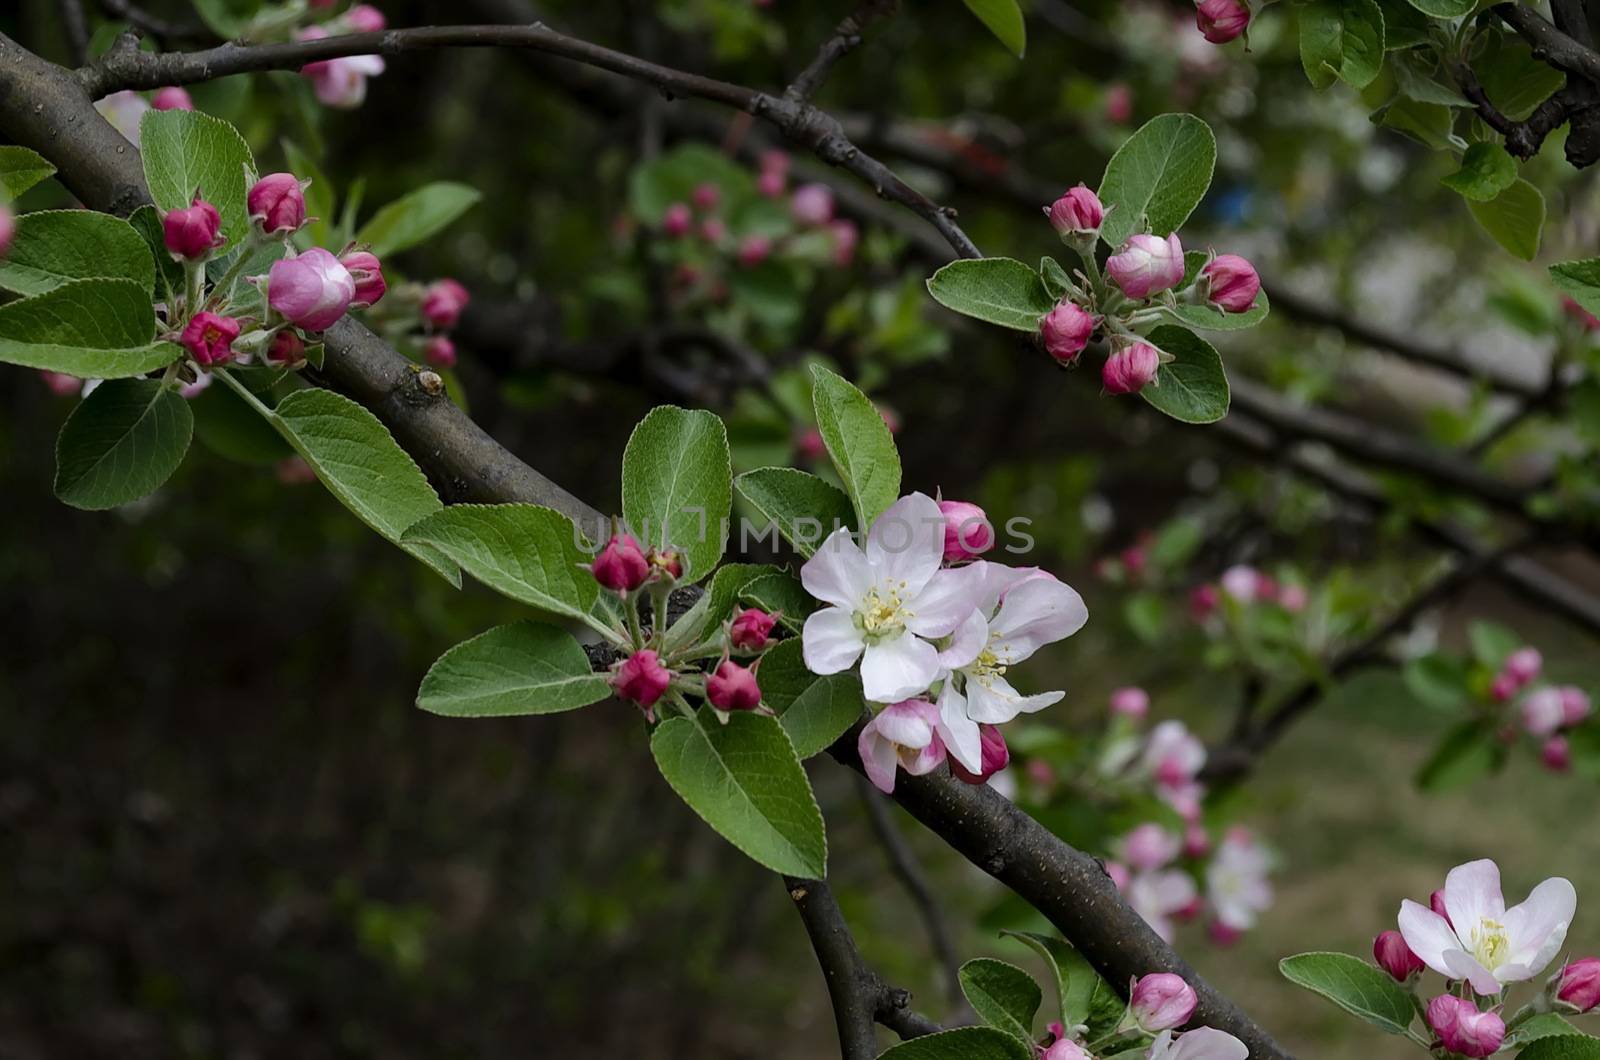 Branch with fresh bloom  of apple-tree in park, Sofia, Bulgaria